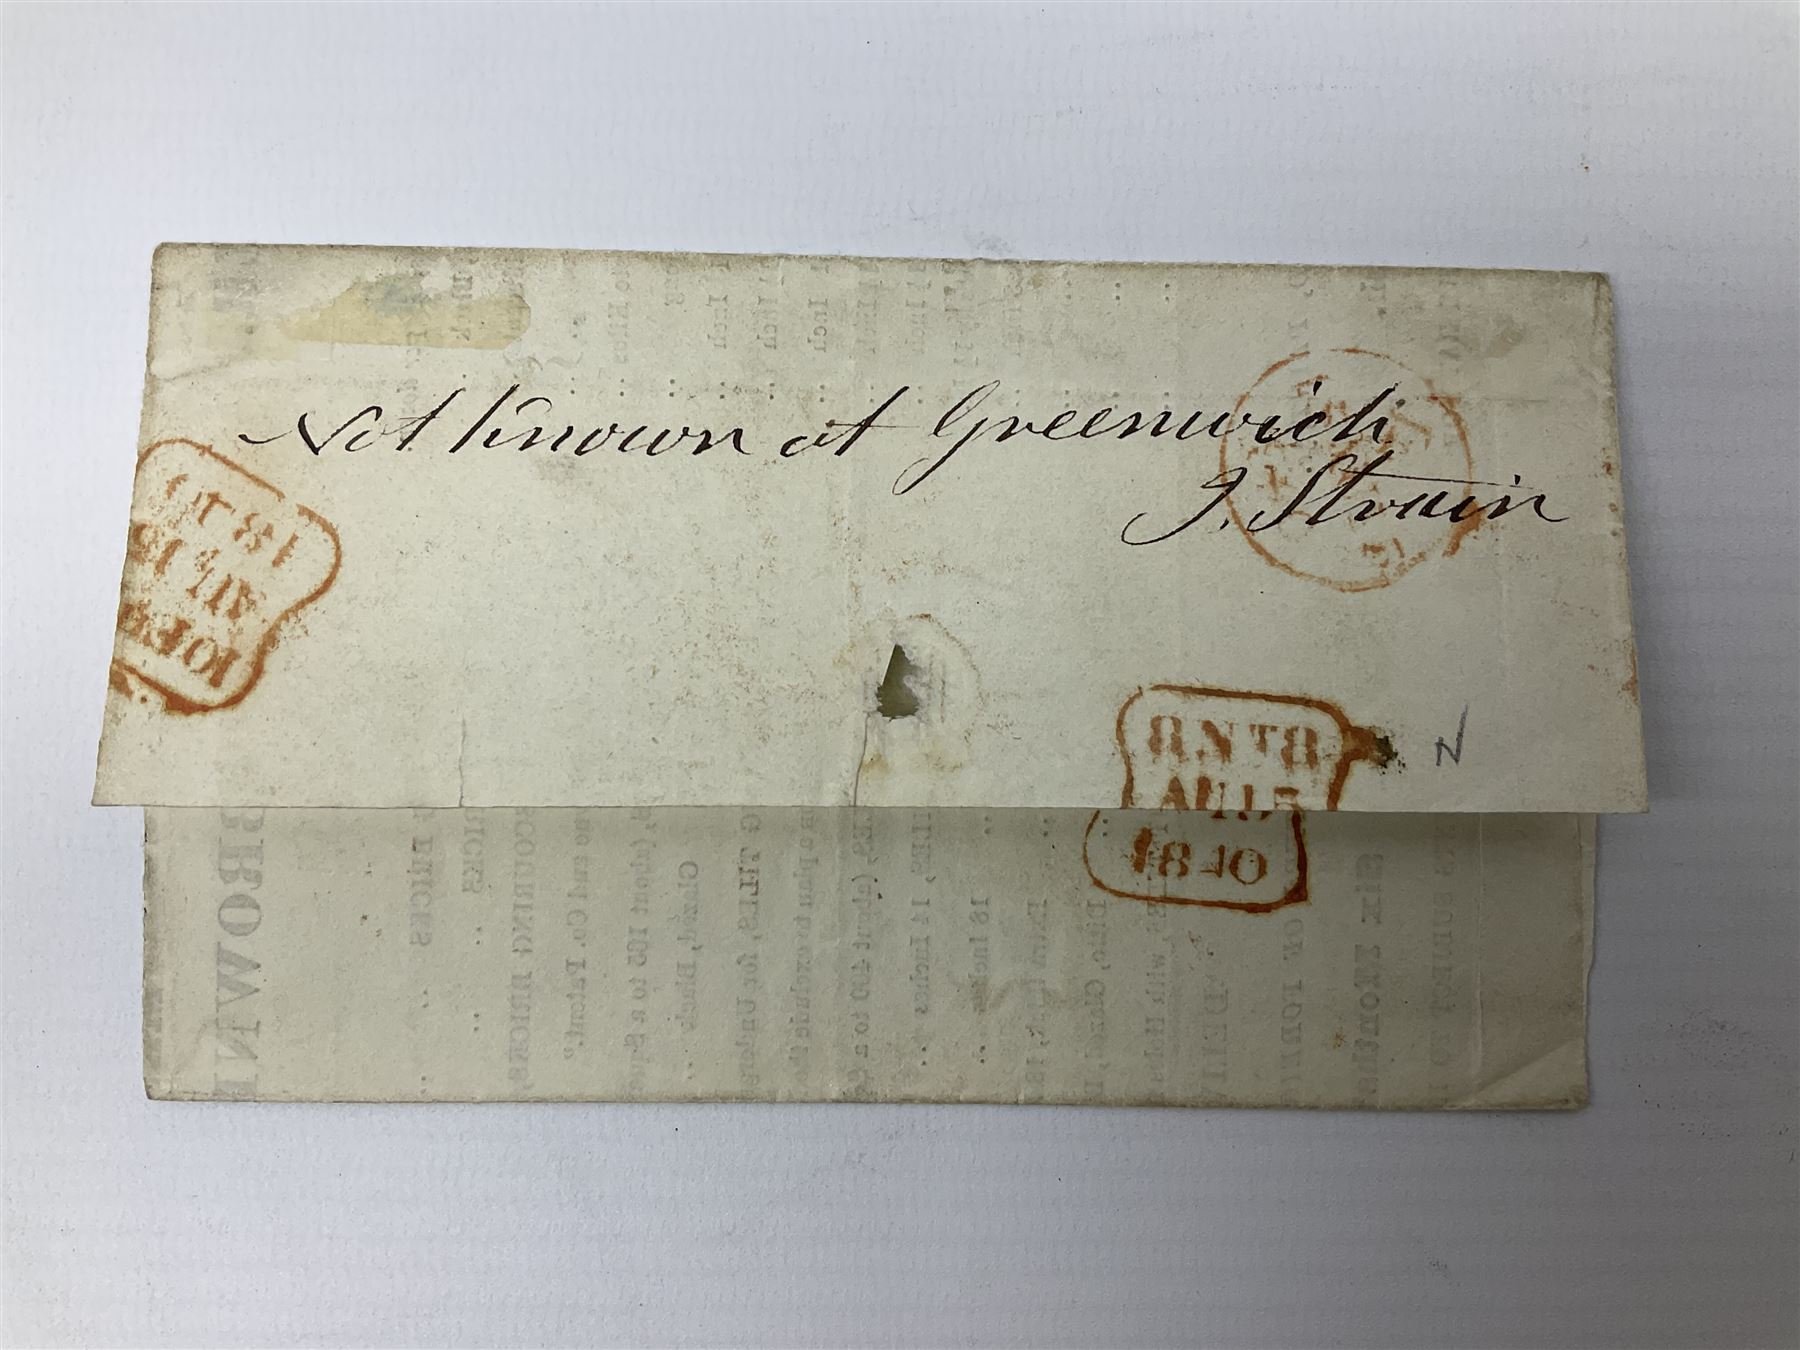 Queen Victoria penny black stamp on advertisement letter 'Browne & Compy Bridgwater' - Image 4 of 5